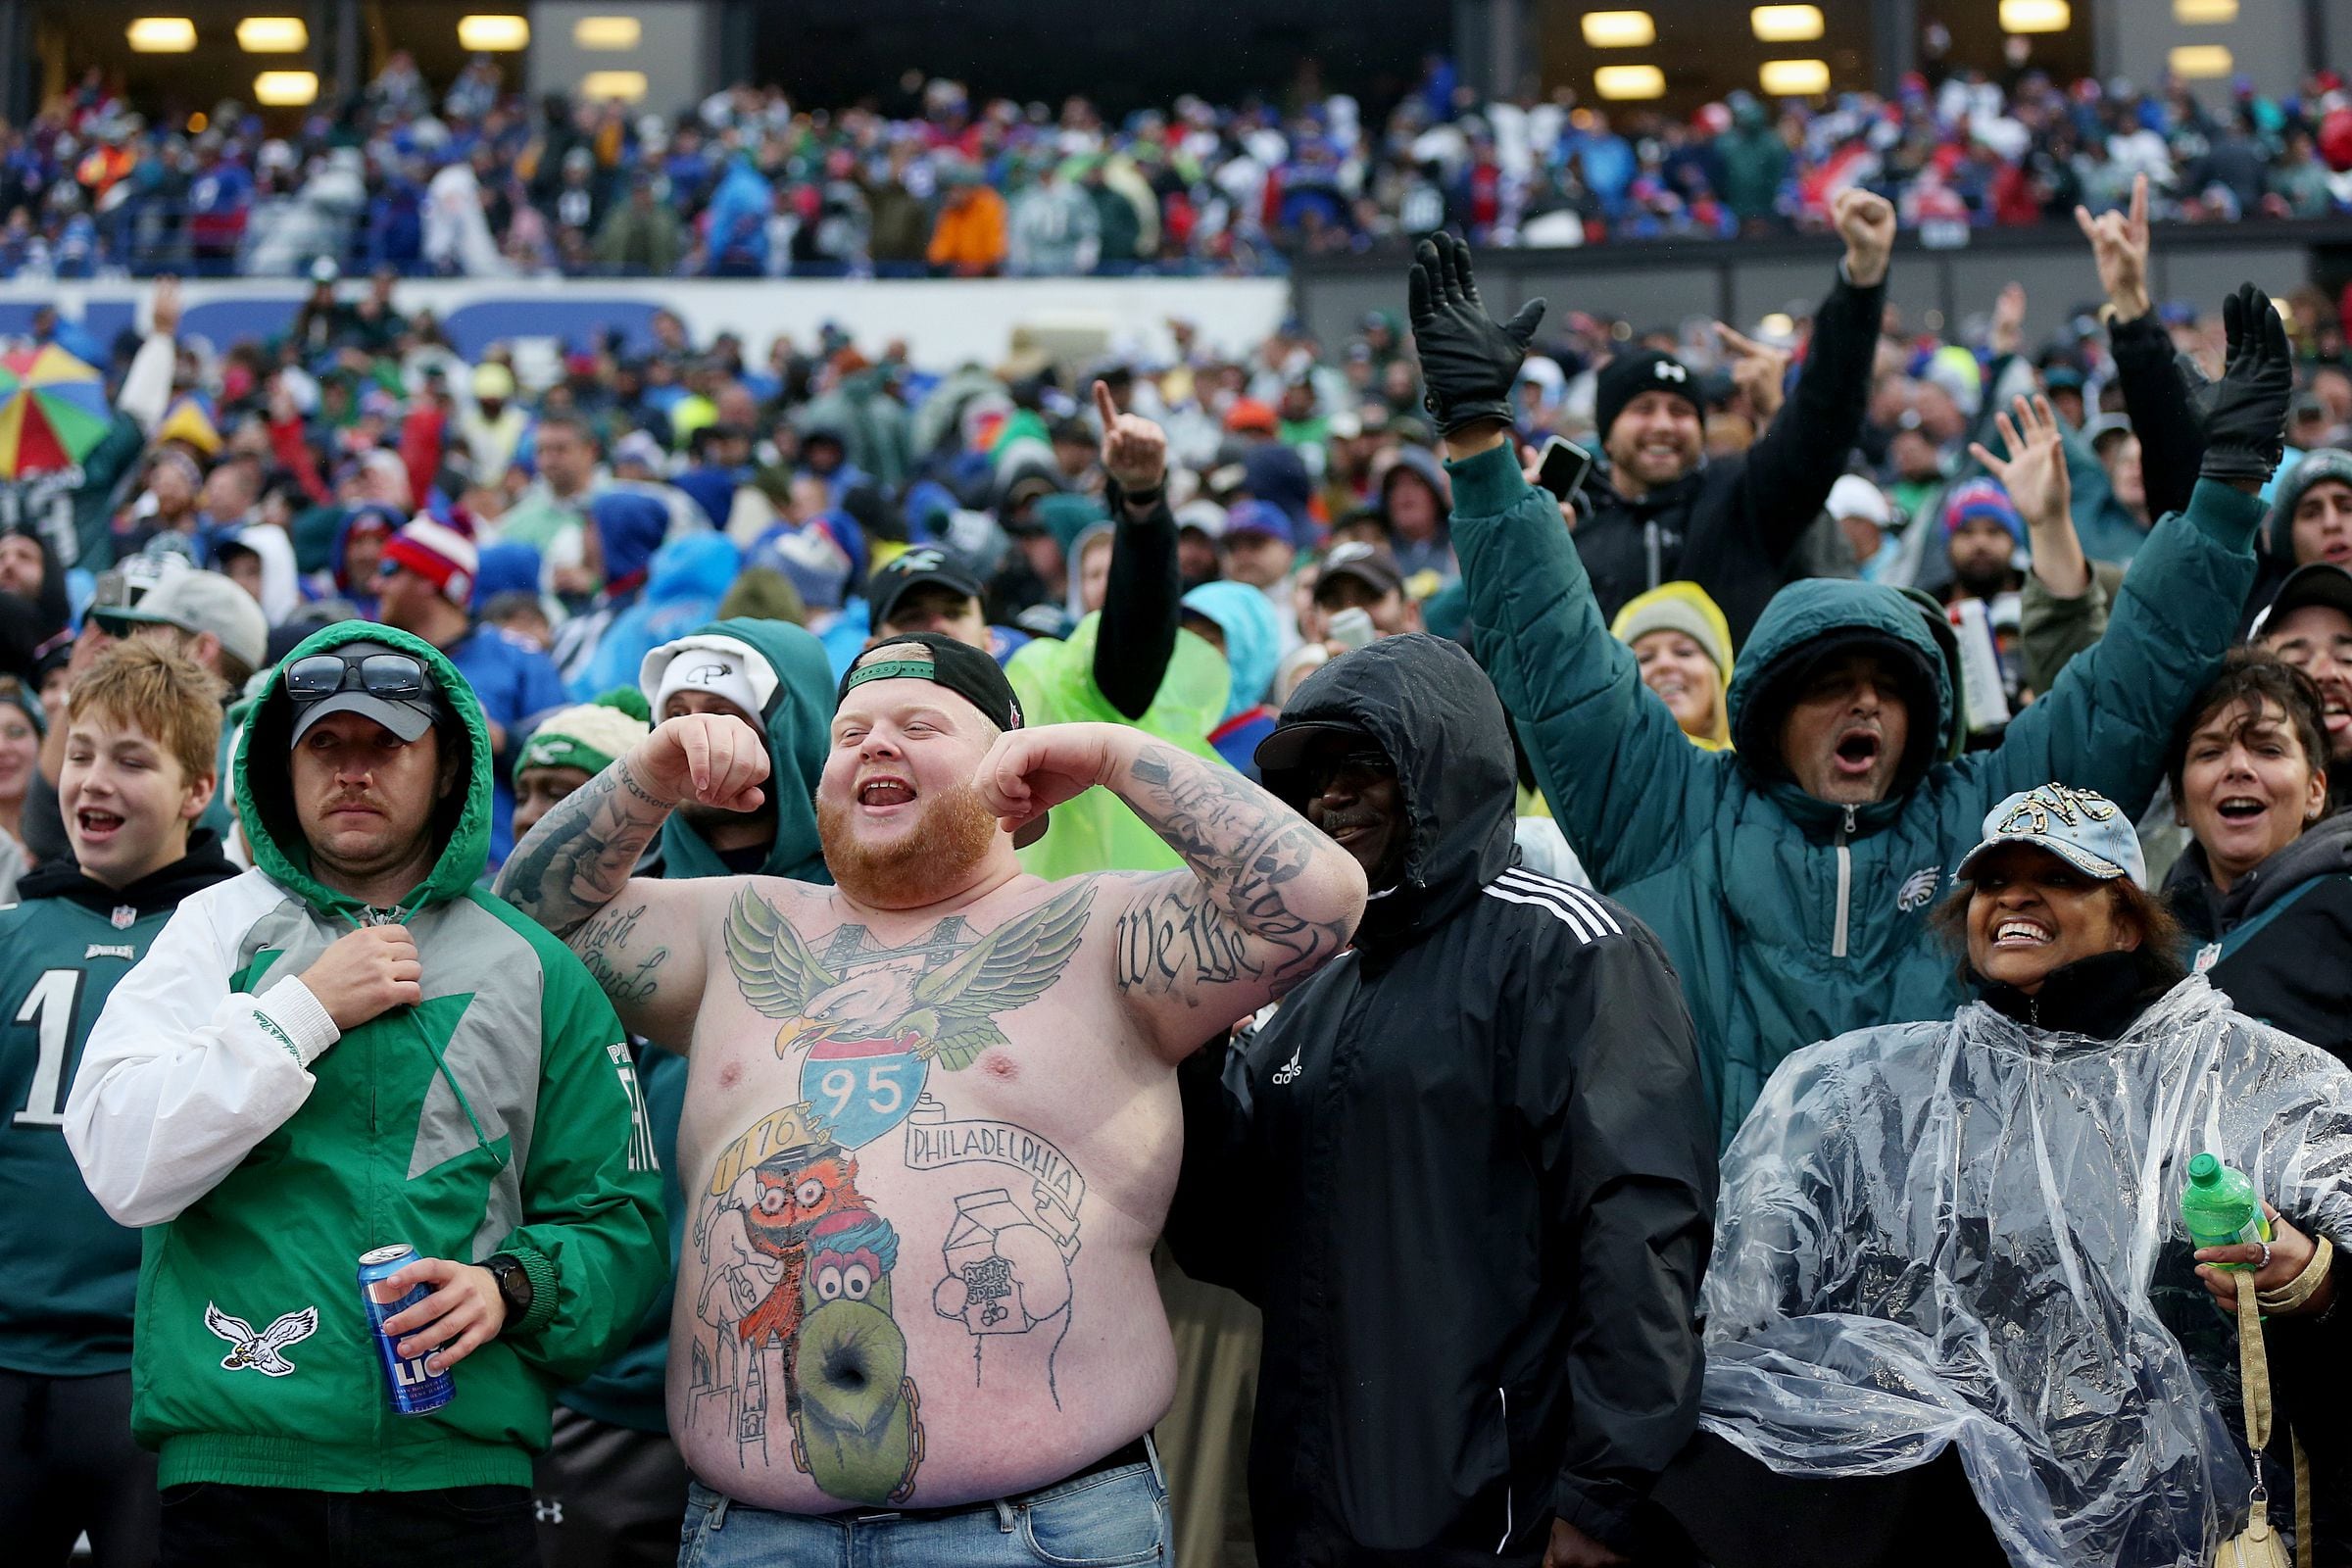 Rob Dunphy, the 'Phanatic tattoo guy,' is ready for an epic Philly sports  weekend